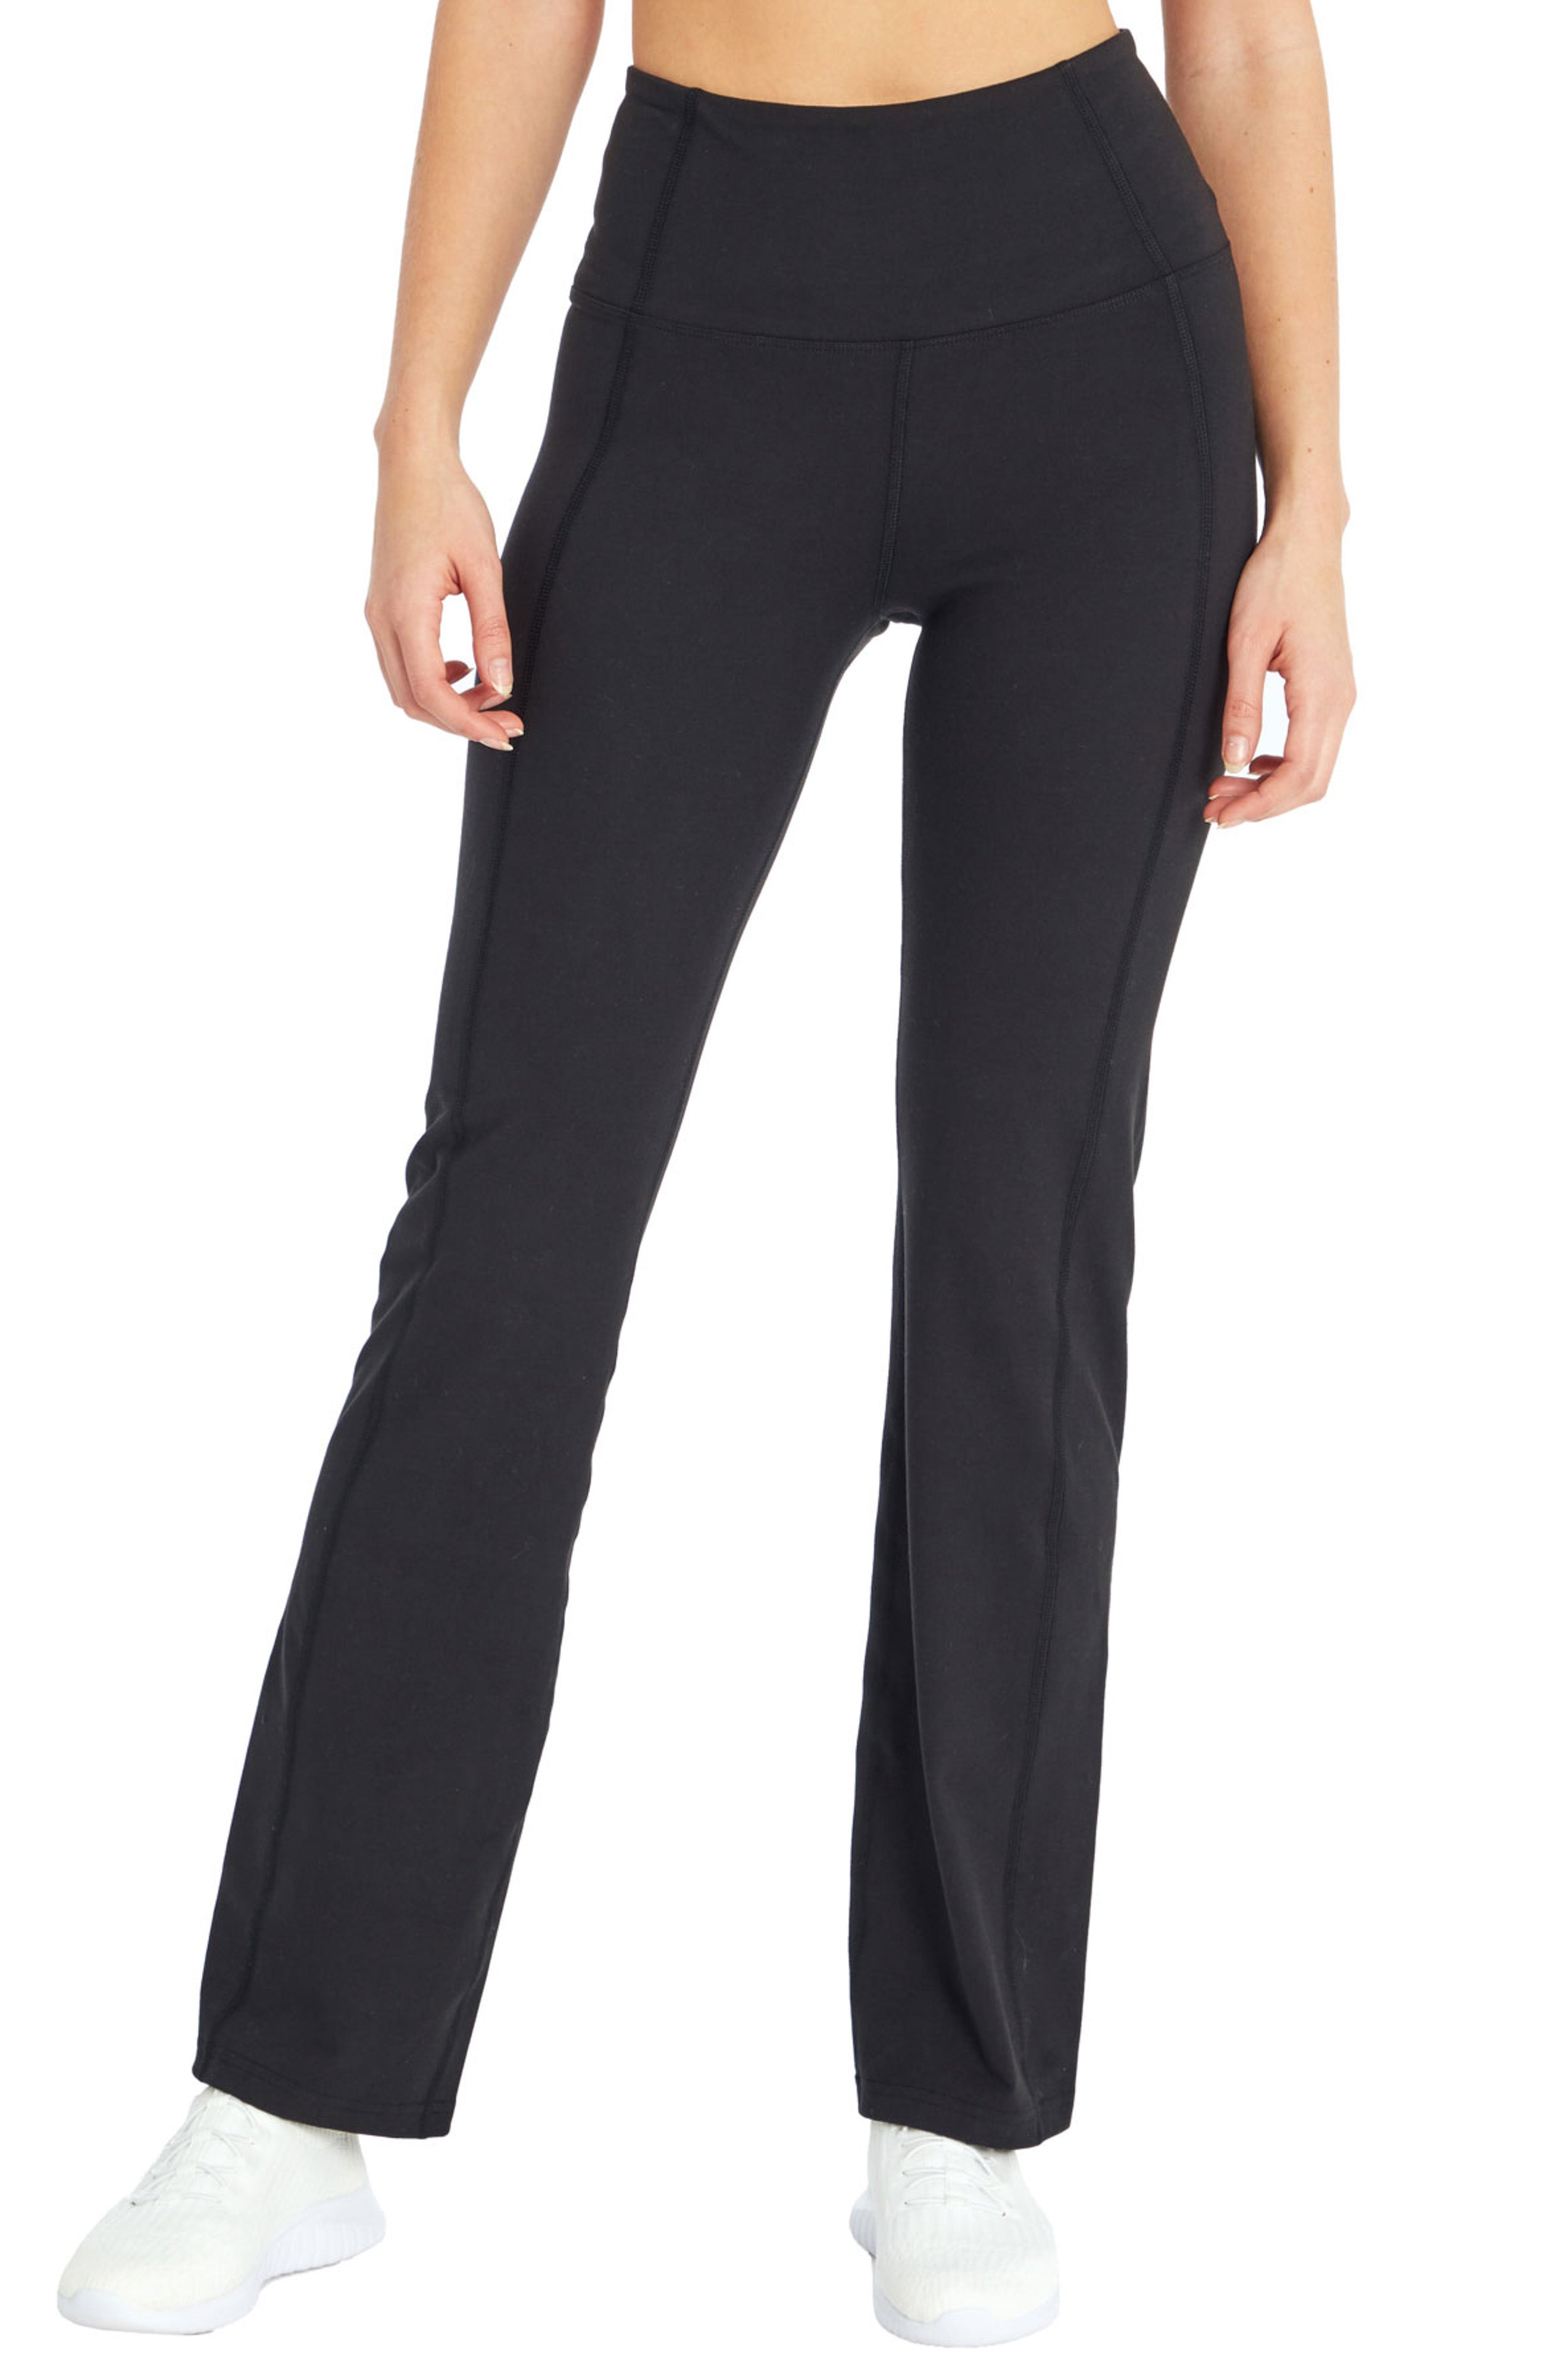 VEZAD Women's Boot-Cut Yoga Pants Tummy Control Workout Non See